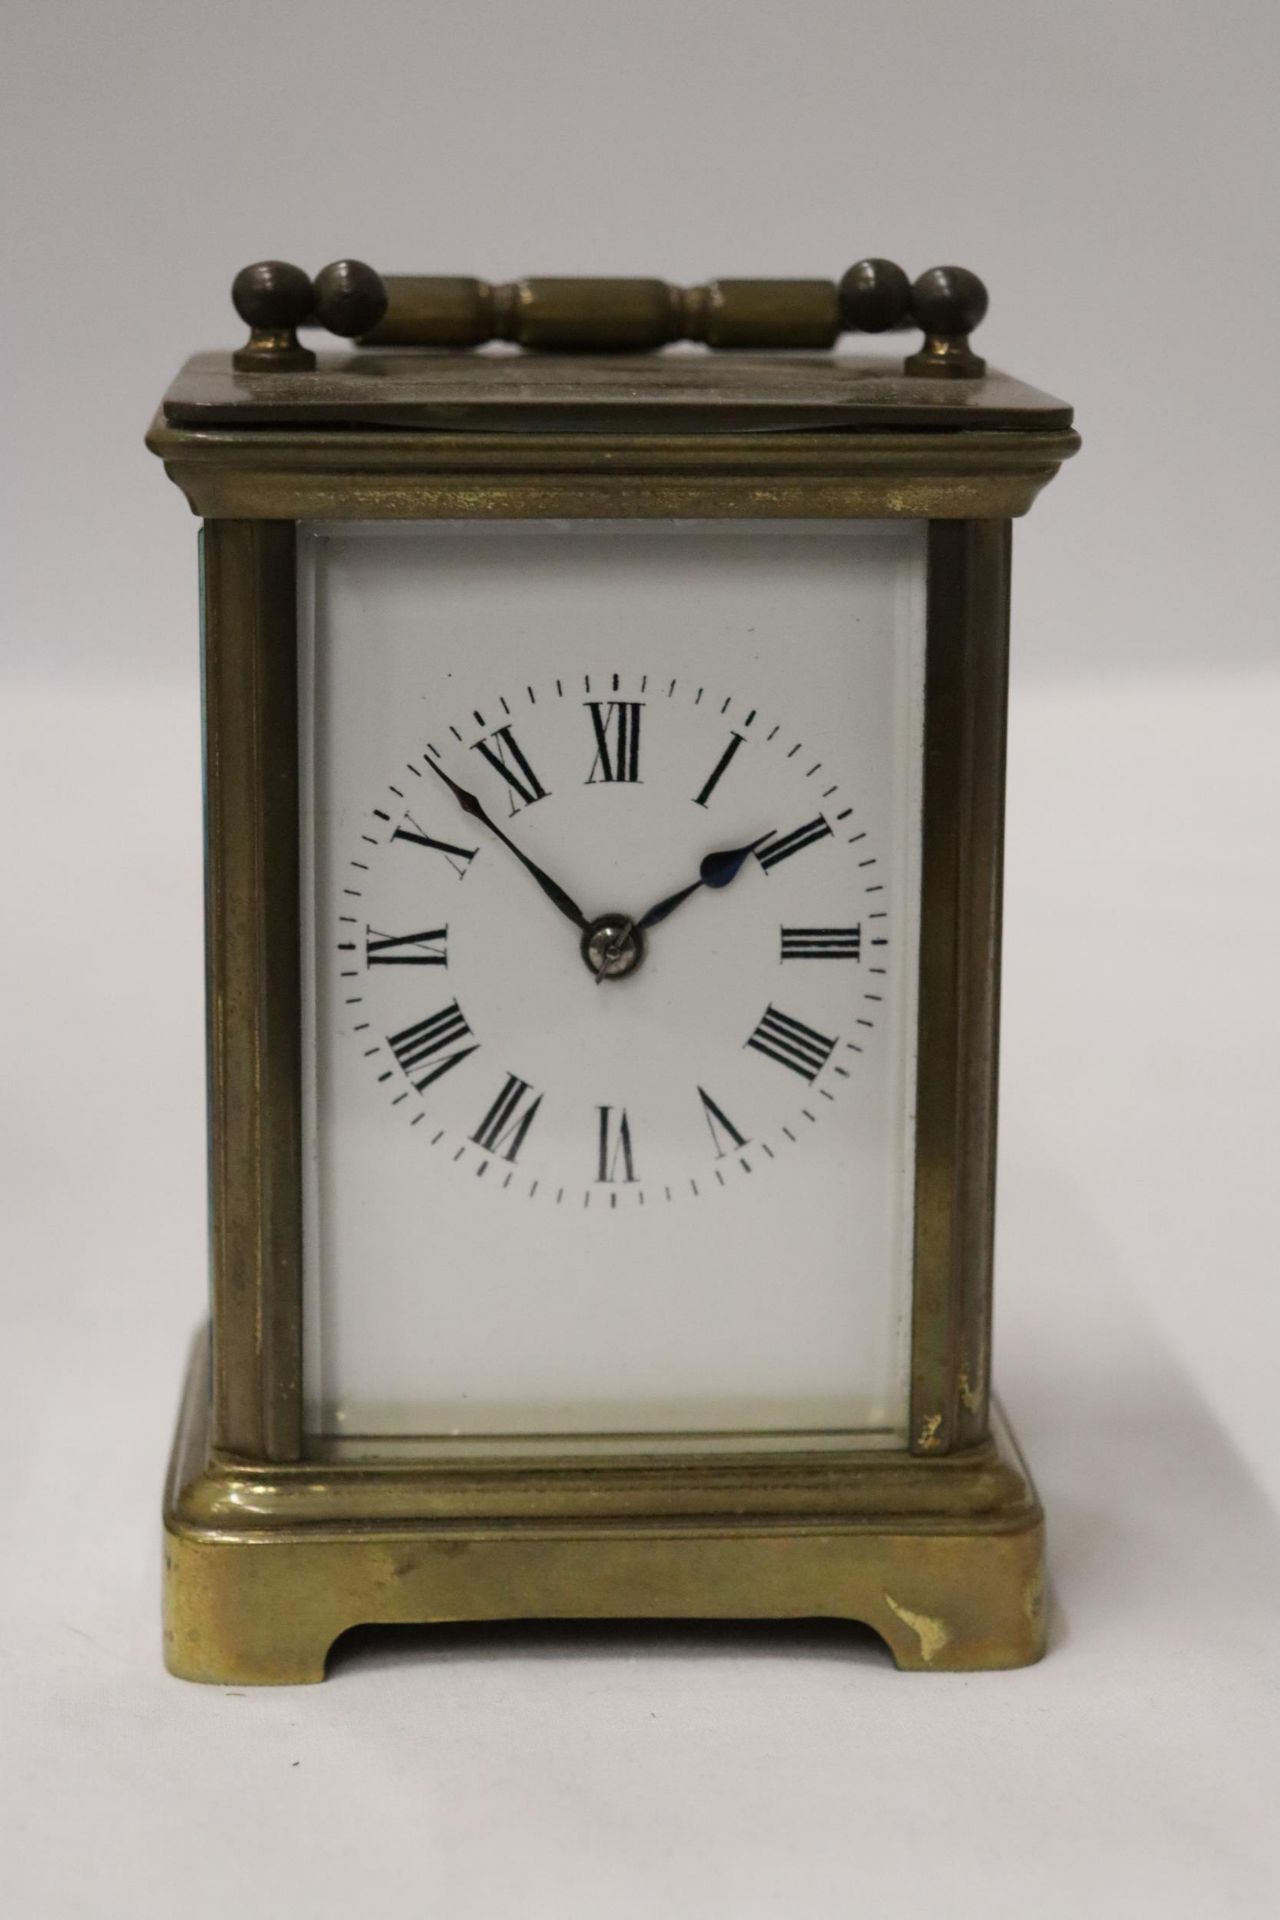 A VINTAGE BRASS ALARM CLOCK WITH GLASS SIDES TO SHOW INNER WORKINGS, IN A LEATHER CASE - Image 4 of 11